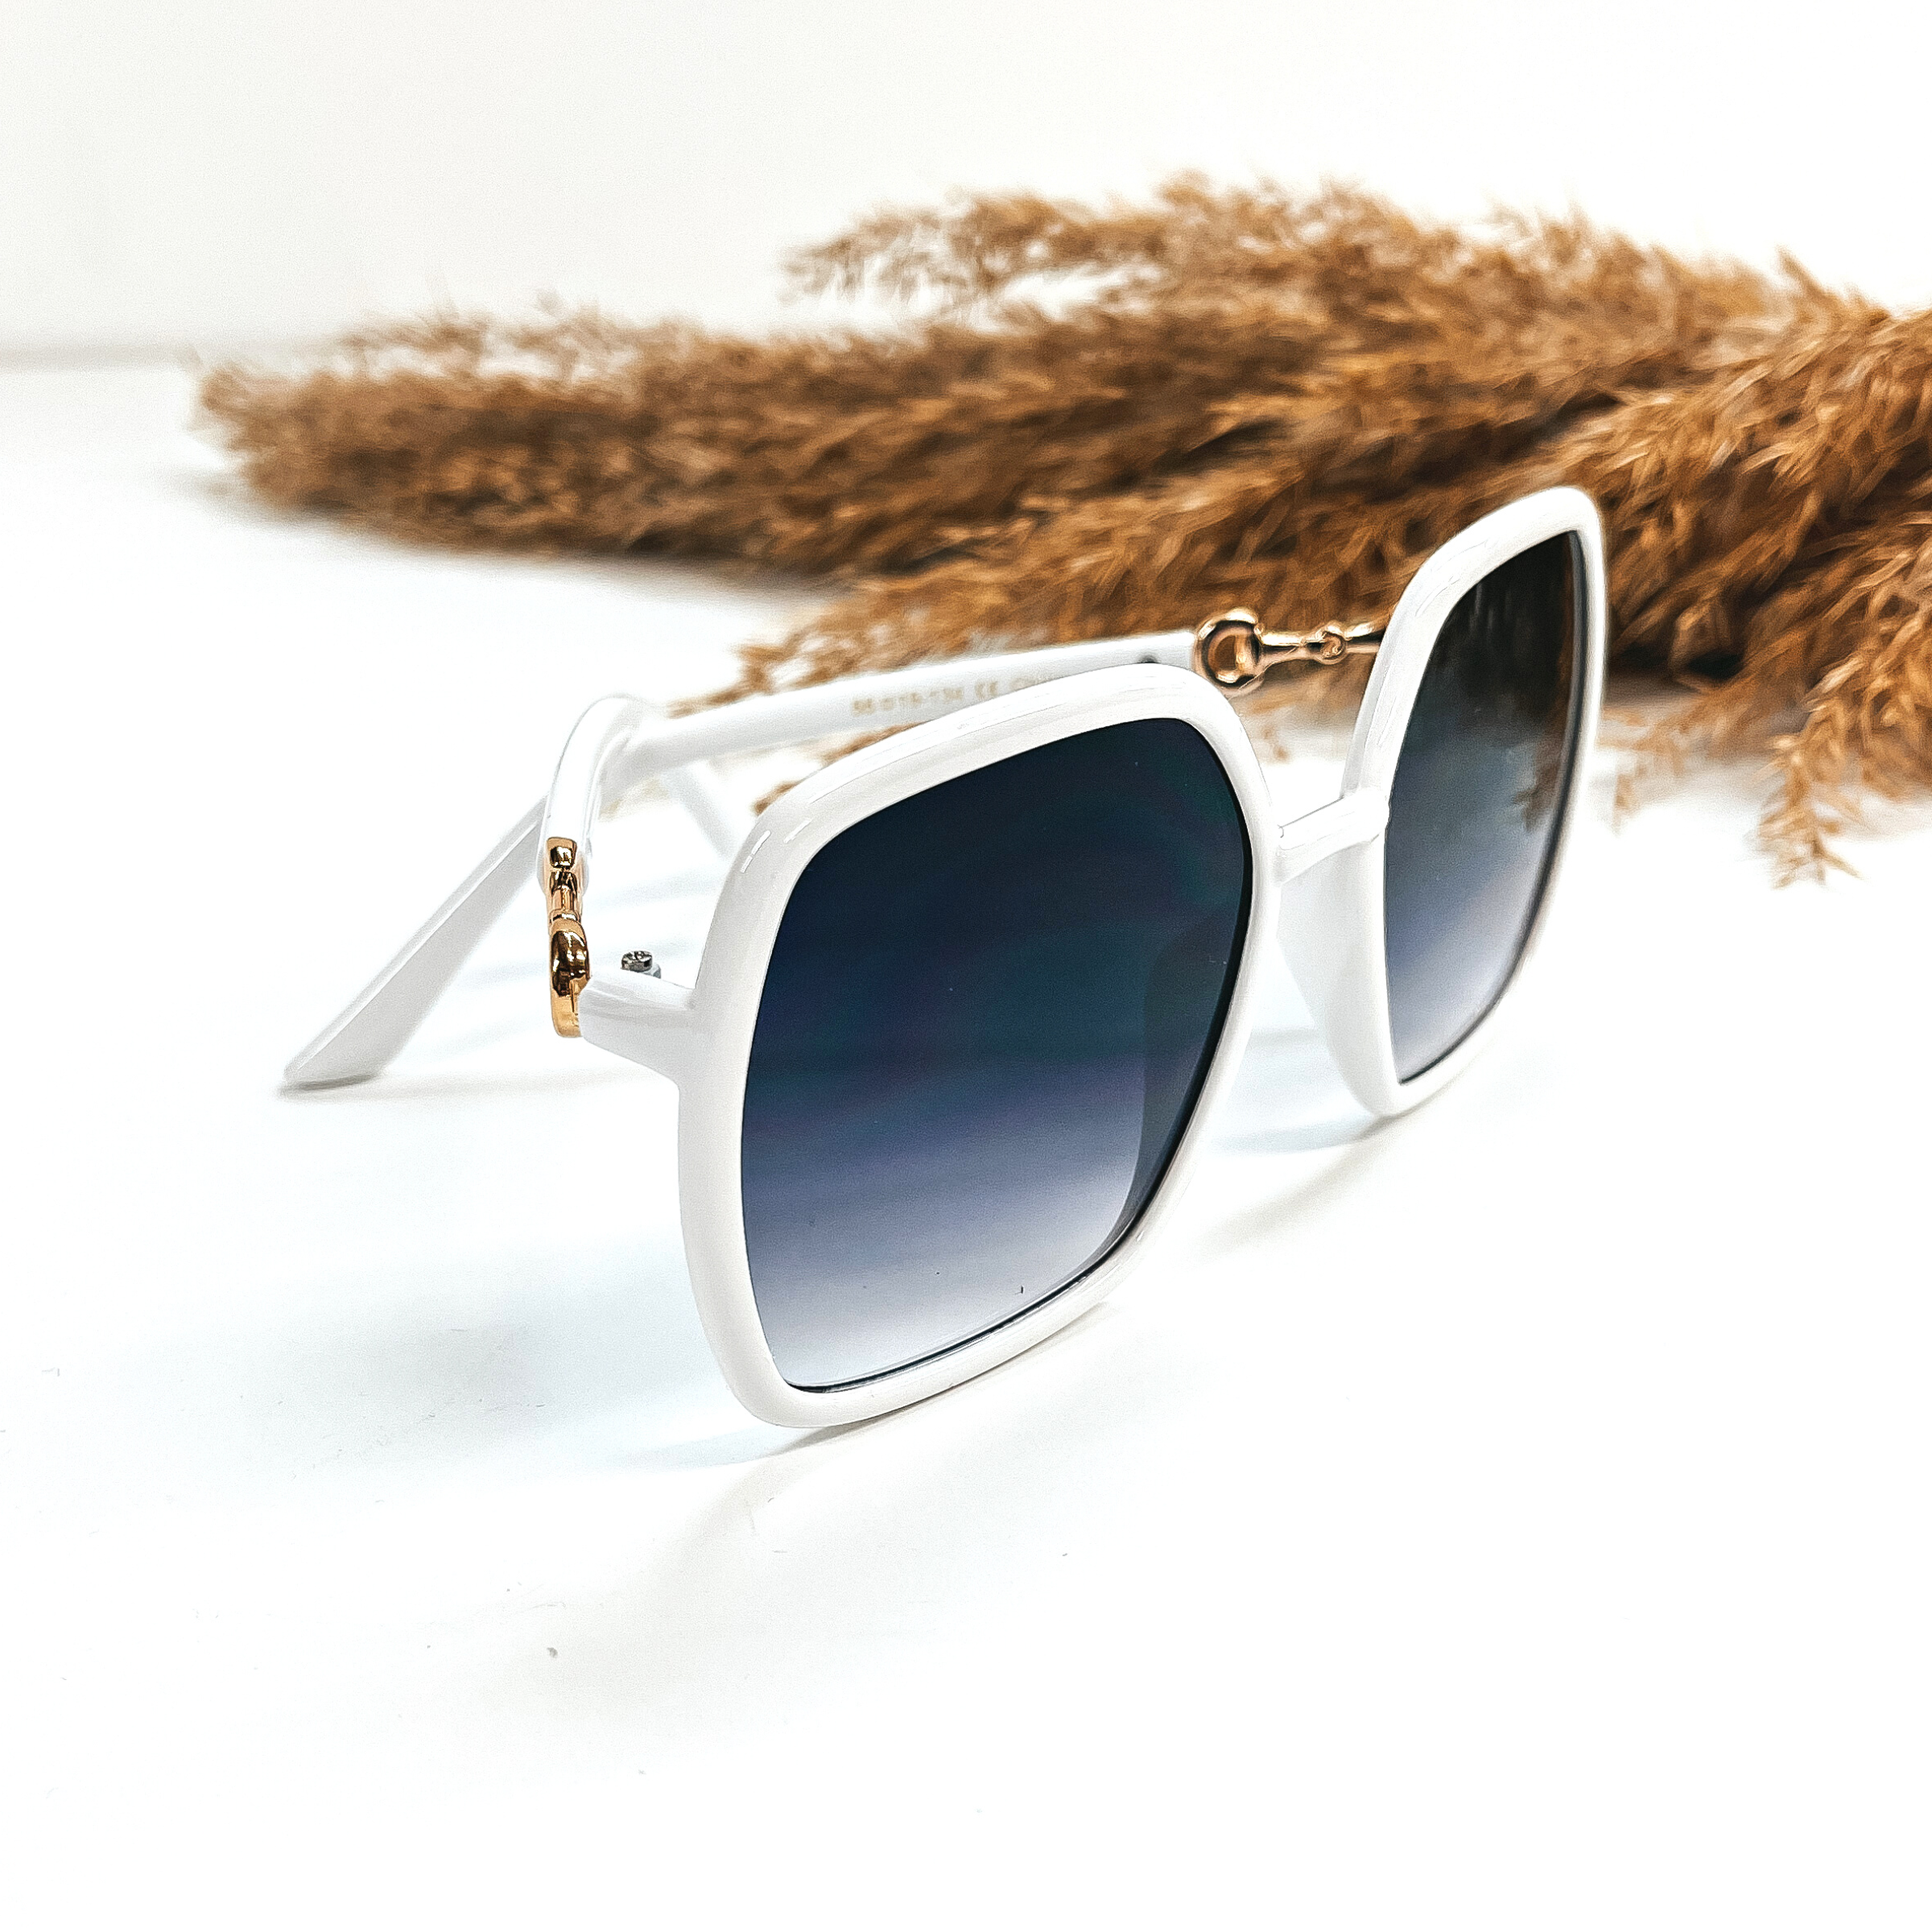 This is a pair of white frame, large, square sunglasses with a  black/dark grey lense.  The side of the glasses have gold detailing as a connector. These pair of  sunglasses are taken on a white background with a brown plant in the back as decor.